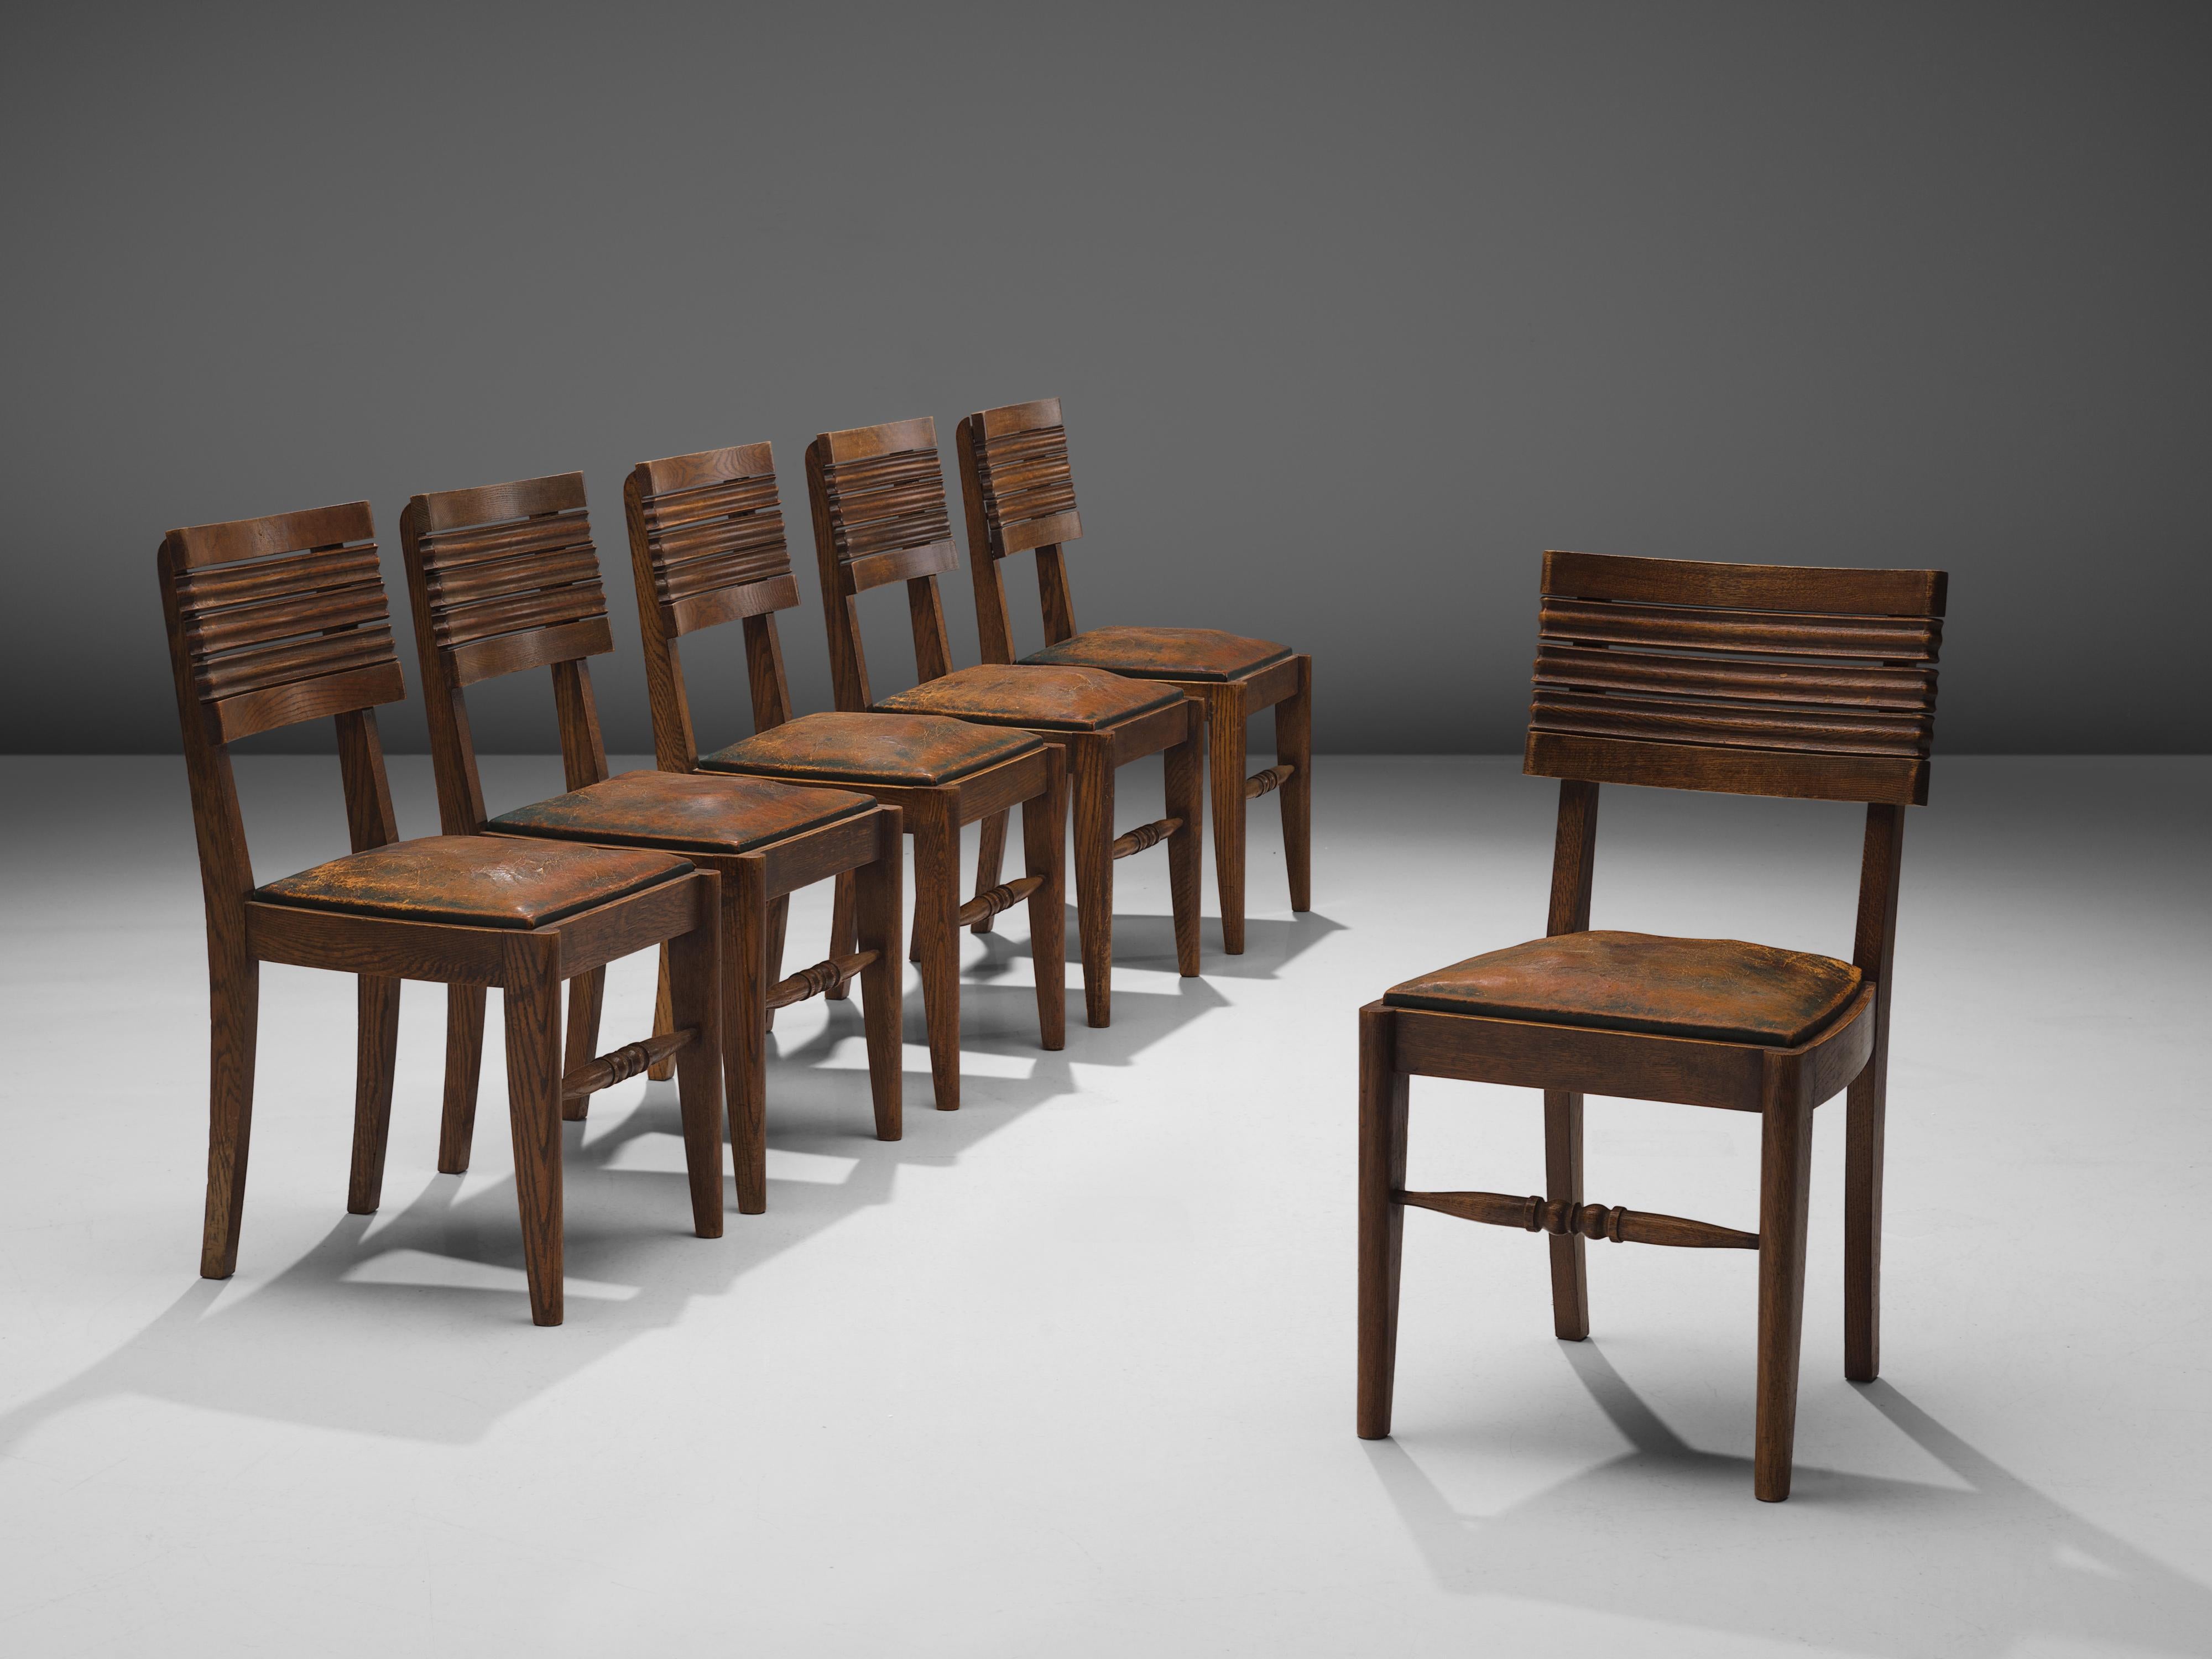 Gaston Poisson, set of six dining chairs, oak, leather, France, 1940s.

Dining chairs in solid oak, with beautiful detailed woodcarving and stunning patinated leather. The back of the chair consist of five slightly curved slats: top and bottom are